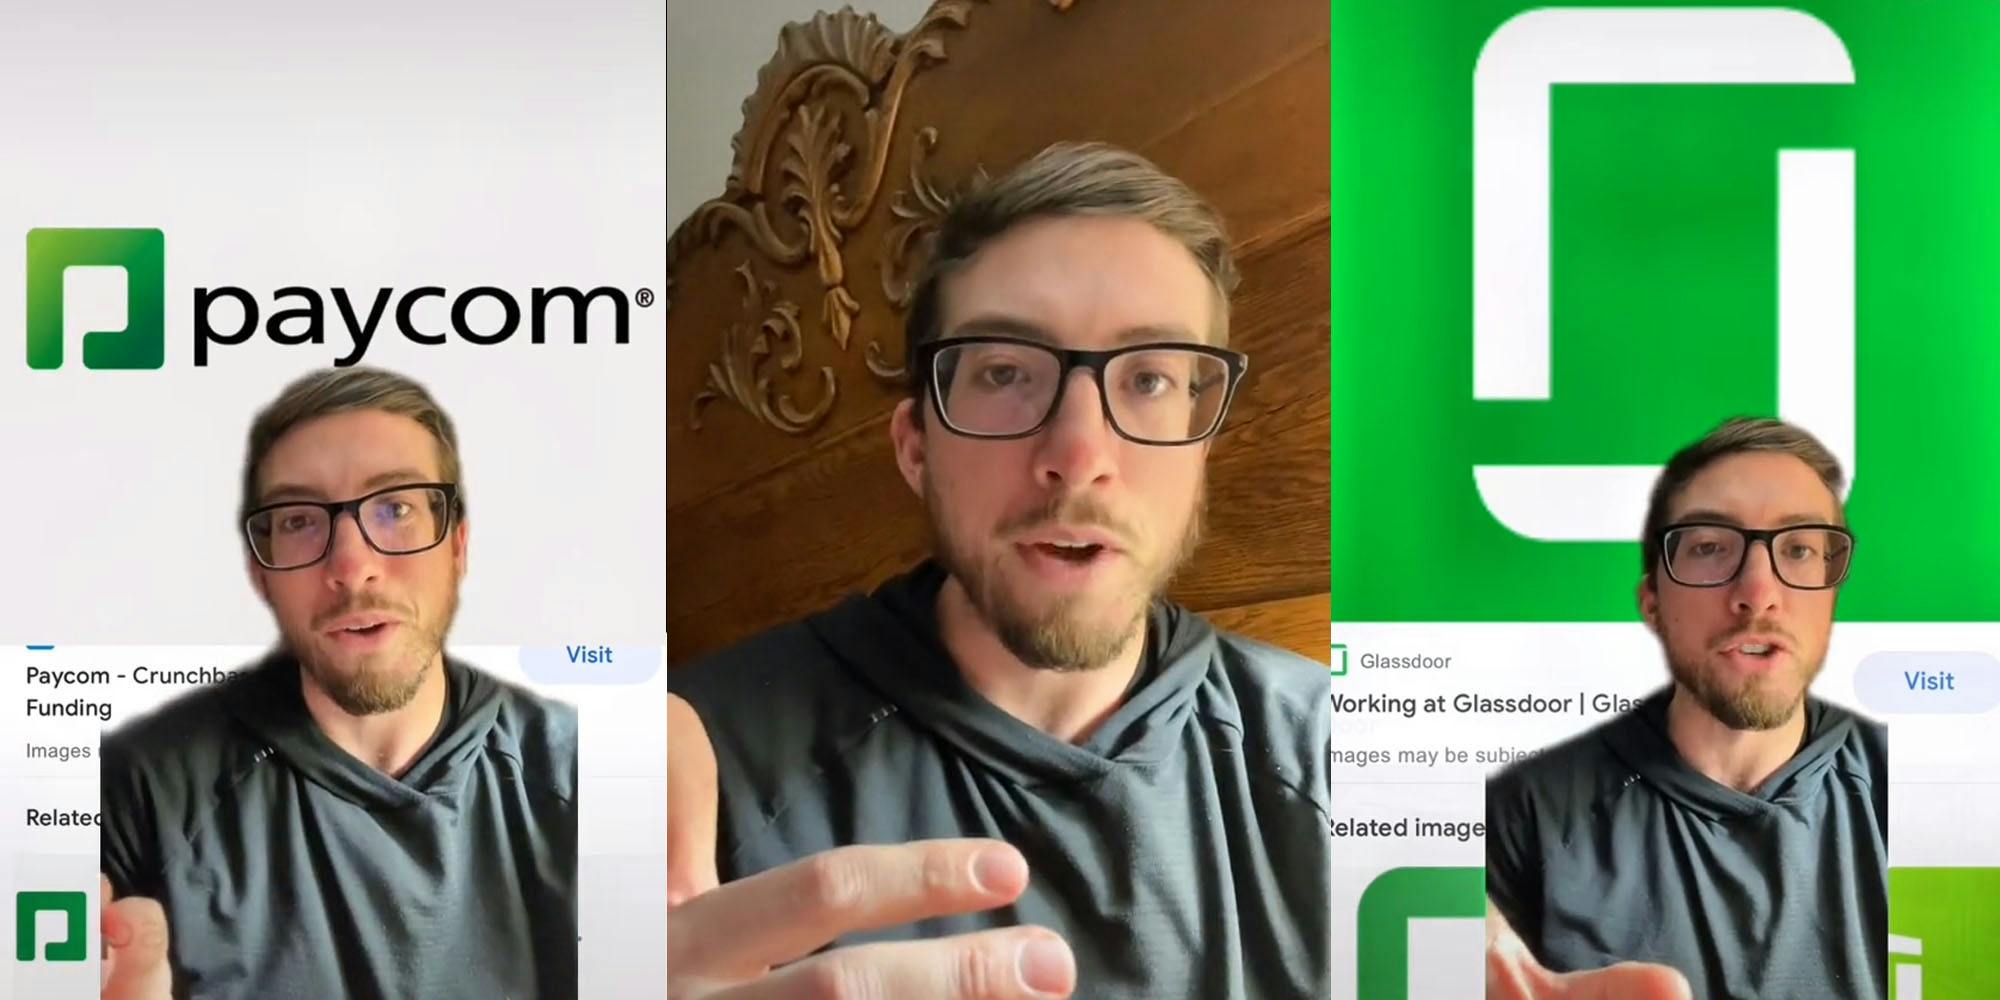 Man with glasses in greenscreen tiktok video with paycom logo (l) Man with glasses hand up talking (c) Man with glasses in greenscreen tiktok video with glassdoor logo (r)